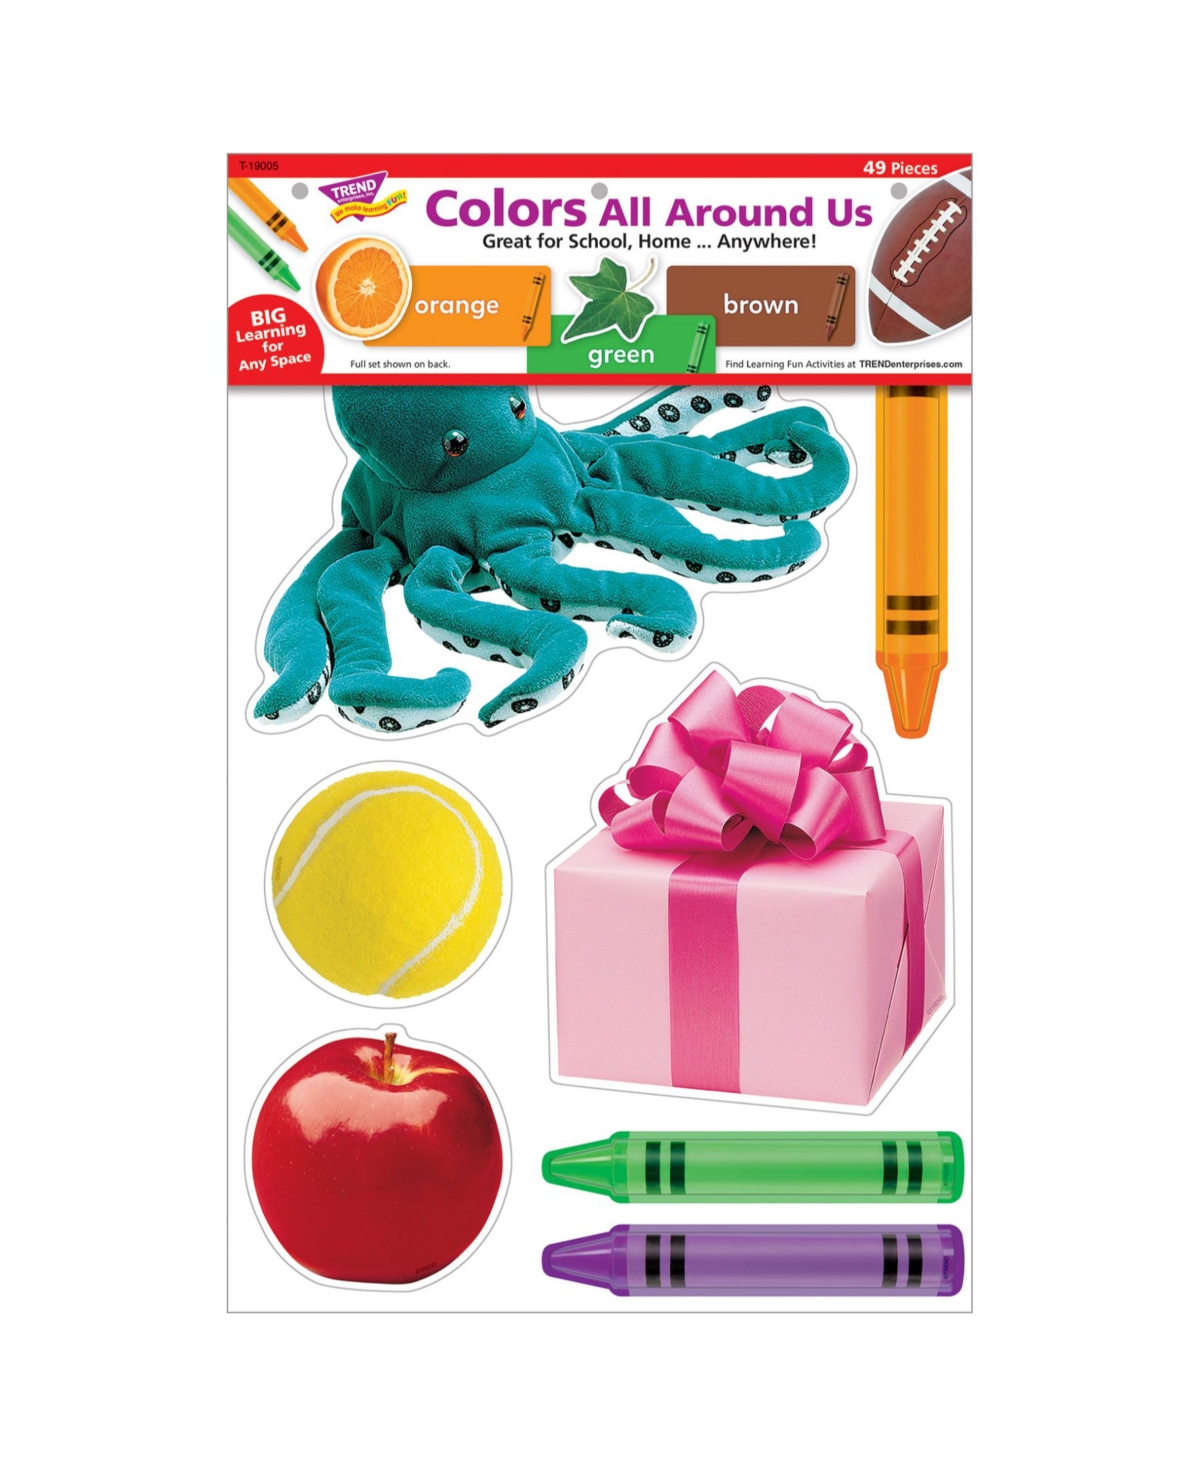 Trend Enterprises Colors All Around Us Learning Set, 49 Pieces In Multi